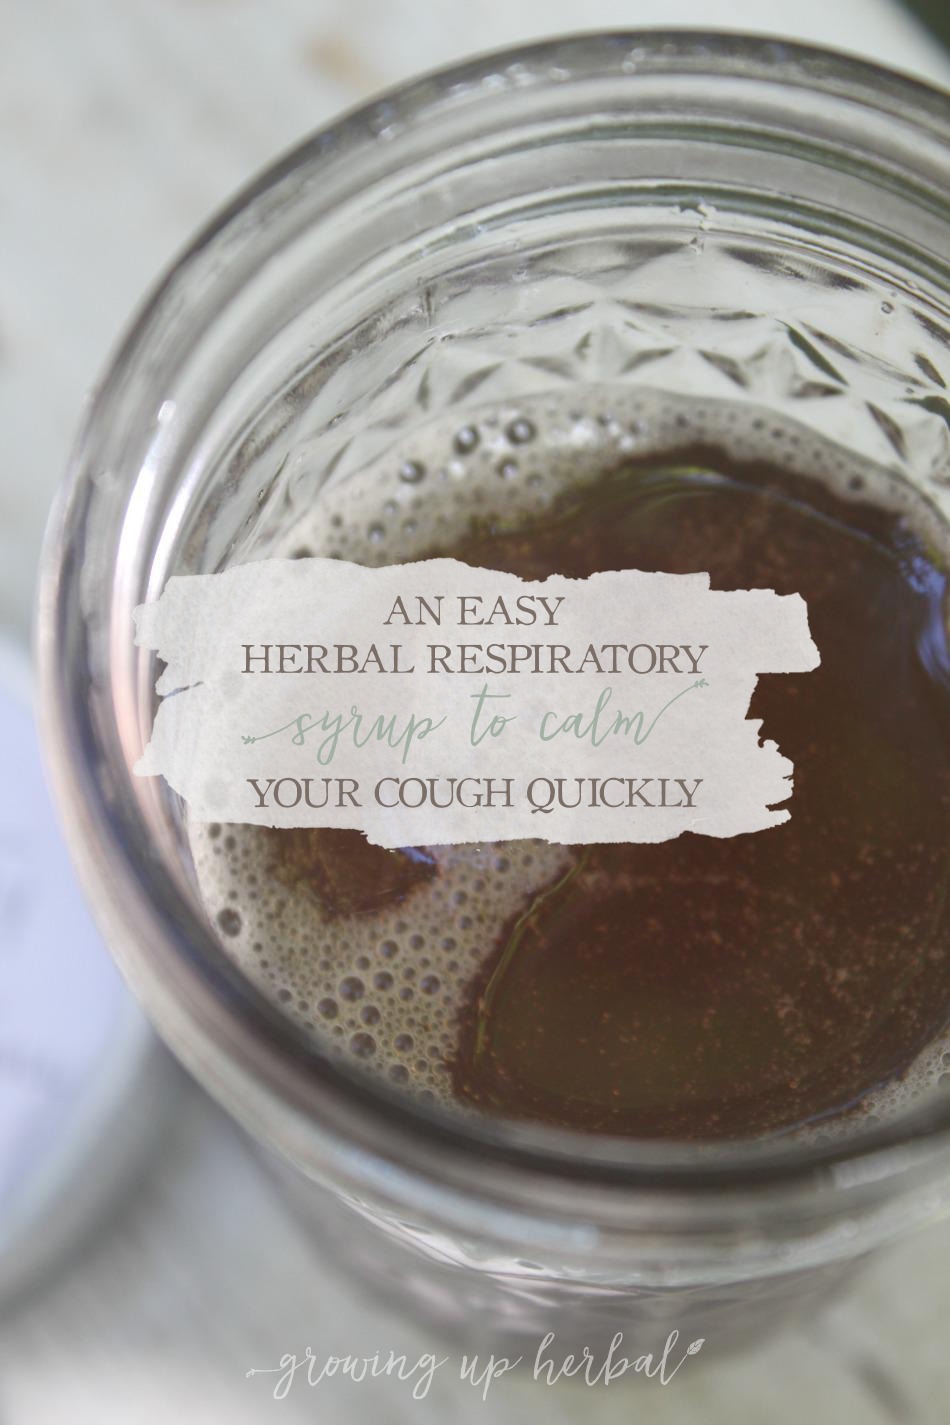 An Easy Herbal Respiratory Syrup To Calm Your Cough Quickly | Growing Up Herbal | An herbal cough syrup for dry, hacking coughs from The Healing Kitchen.